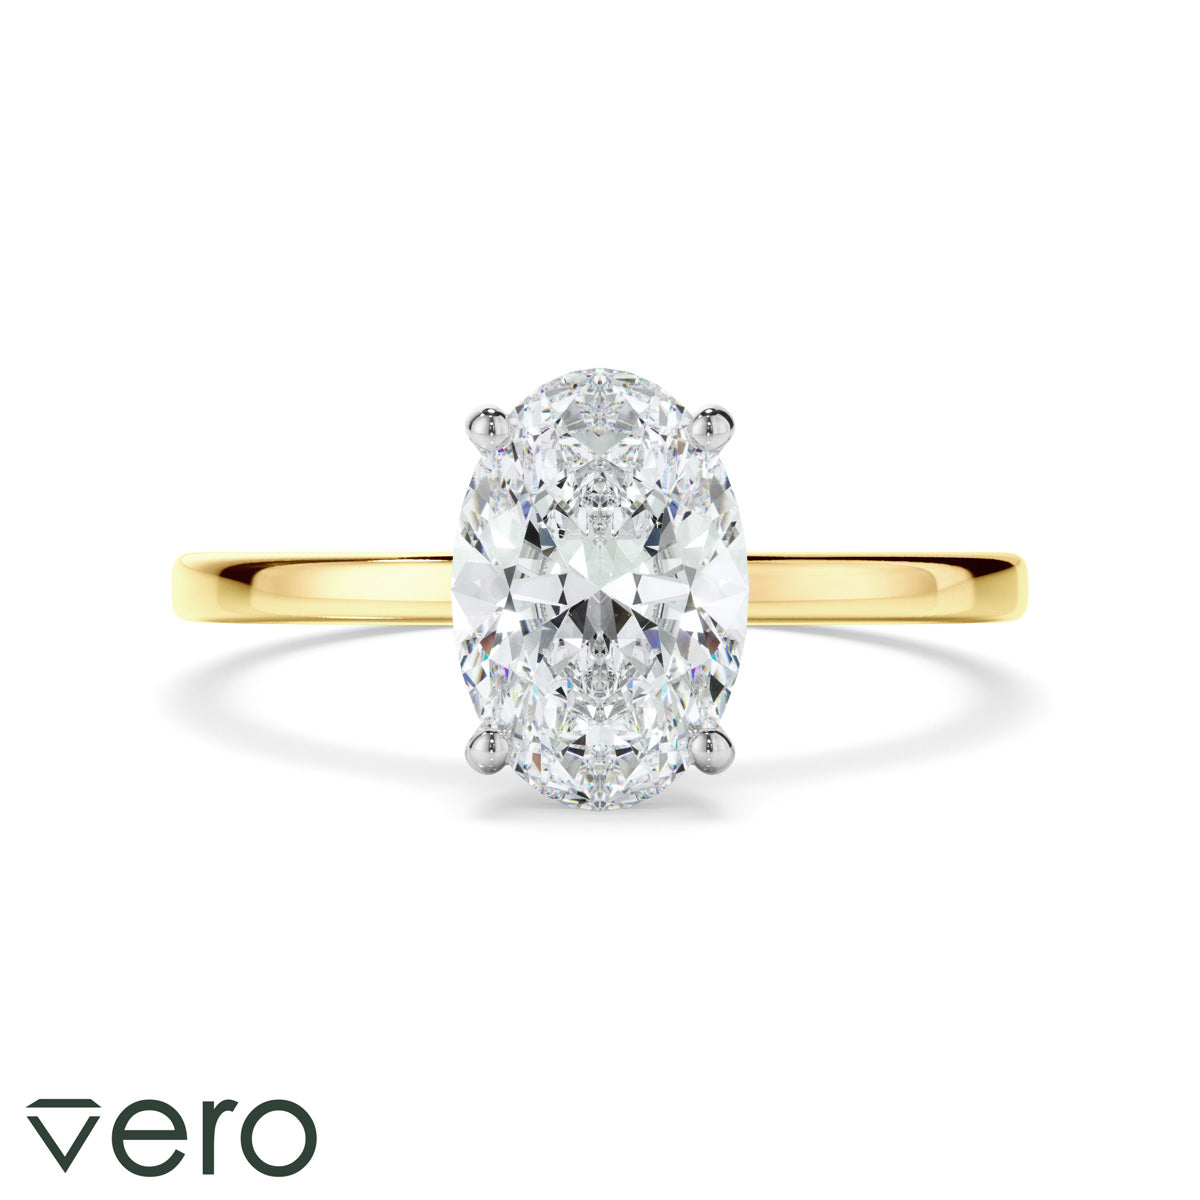 1ct Oval Cut Lab Grown Diamond Ring Set in 18ct Yellow Gold